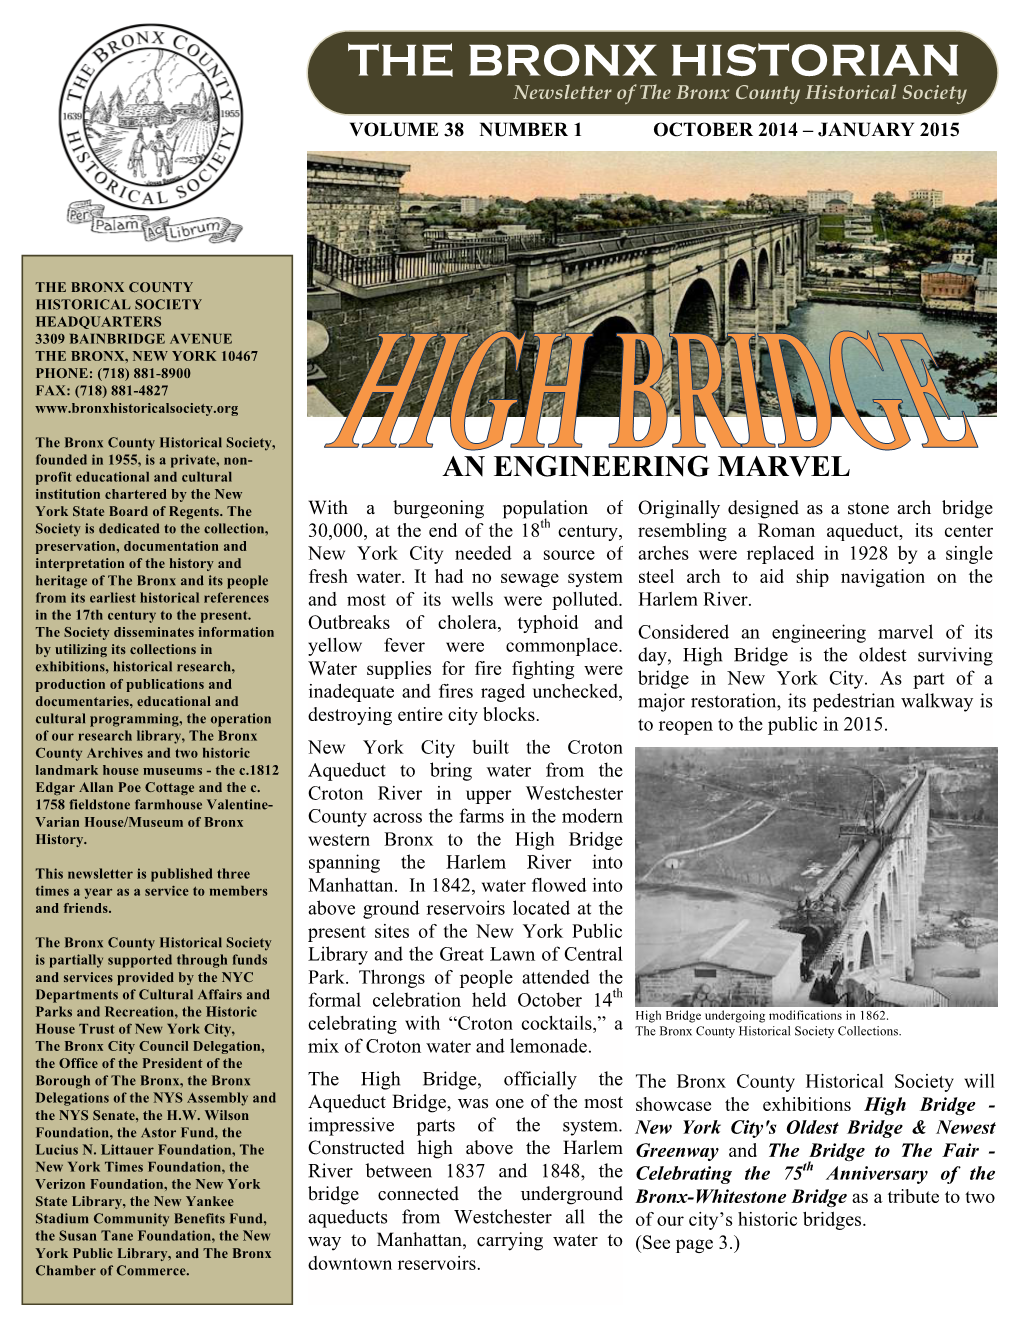 THE BRONX HISTORIAN Newsletter of the Bronx County Historical Society